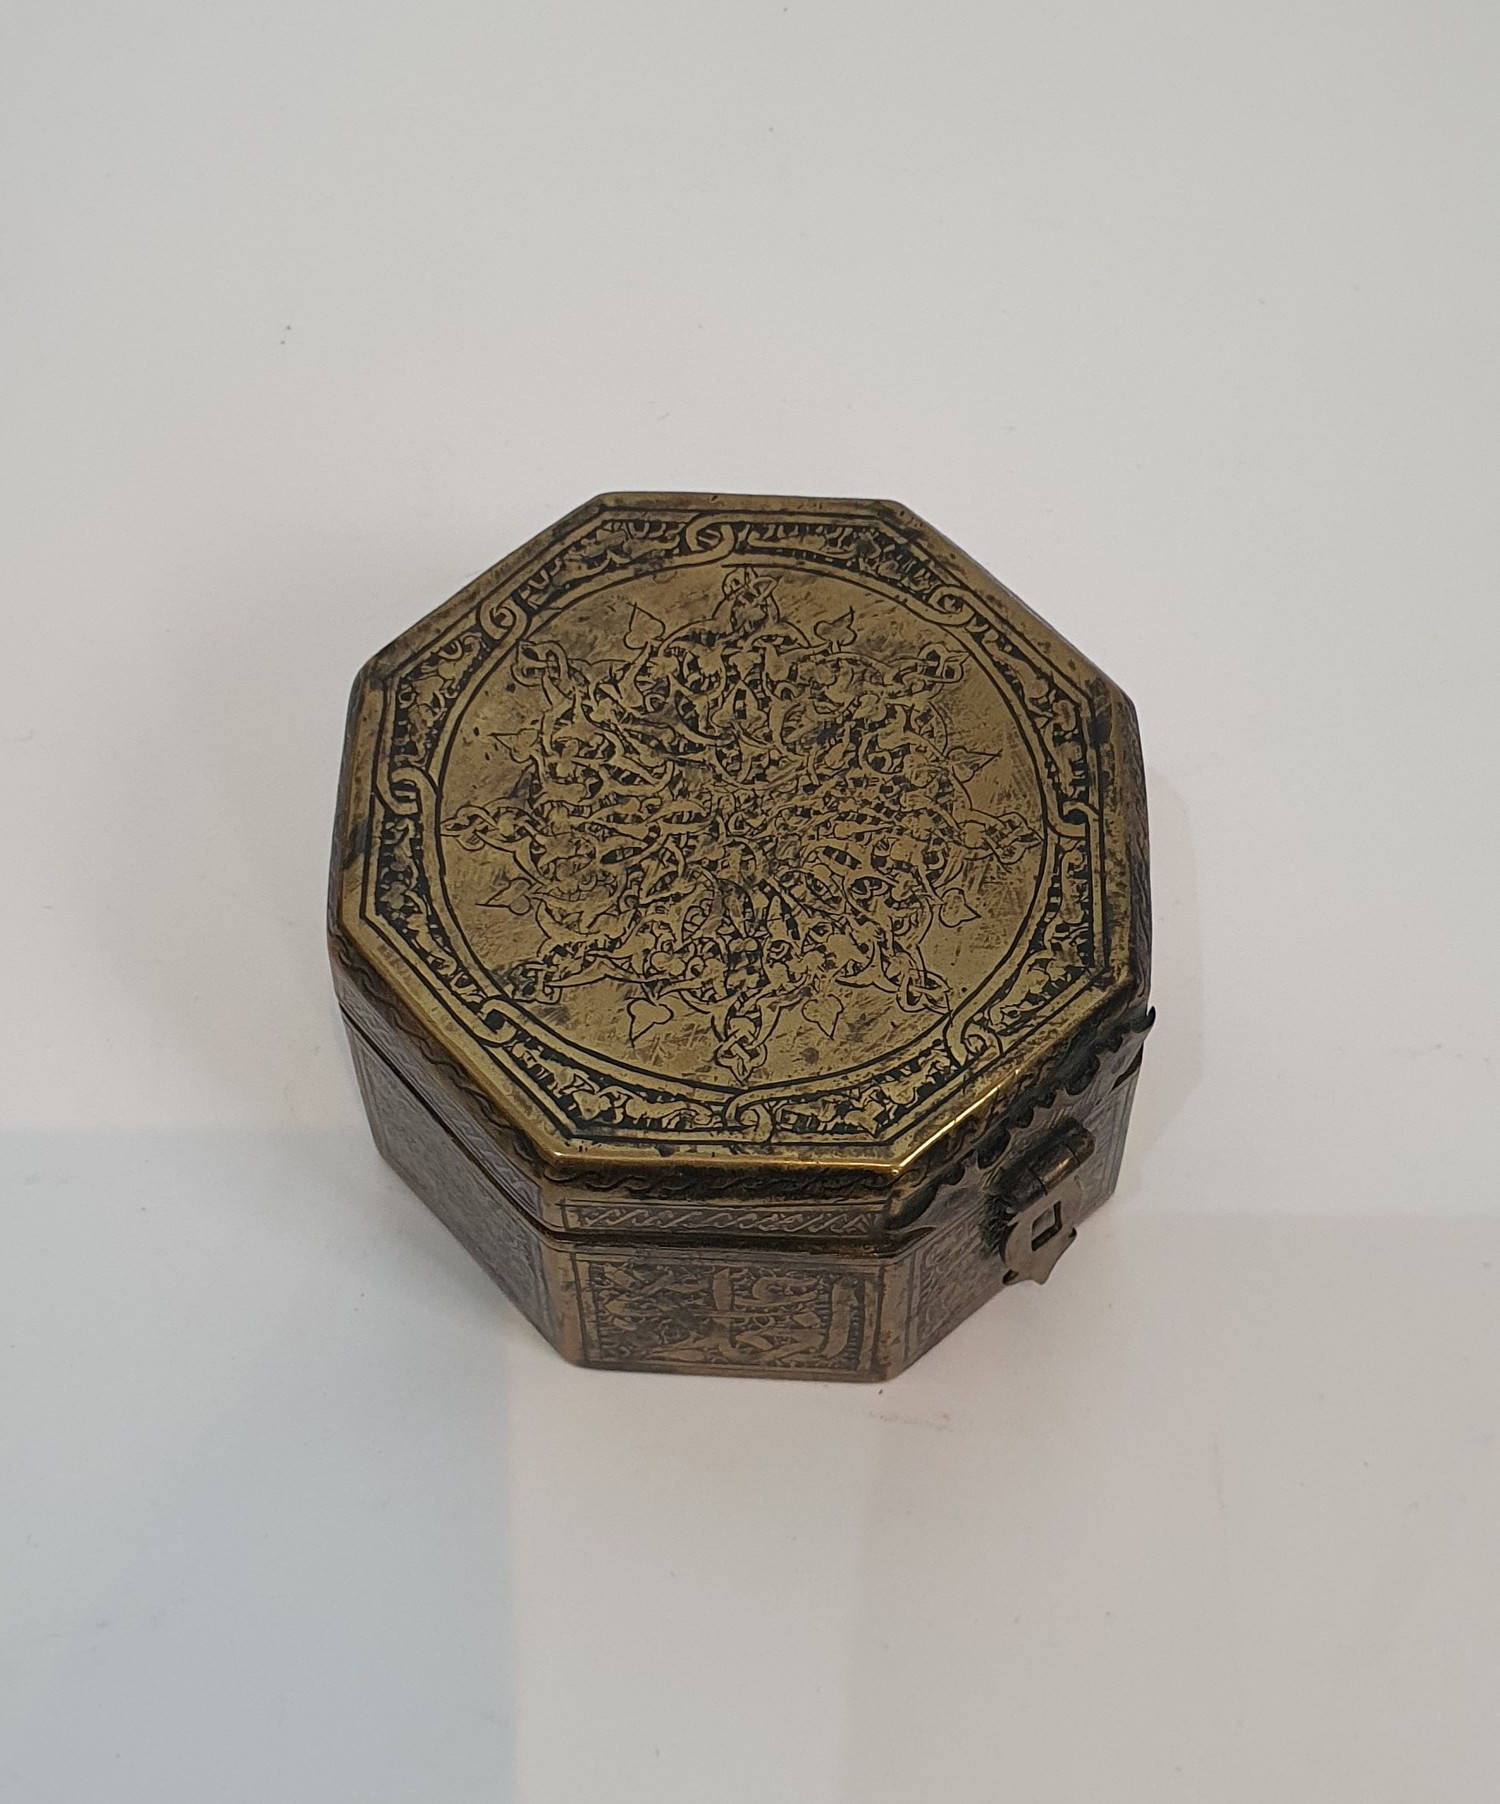 An Islamic hinged brass box with clasp engraved with a stylised calligraphy design along with two - Image 2 of 6